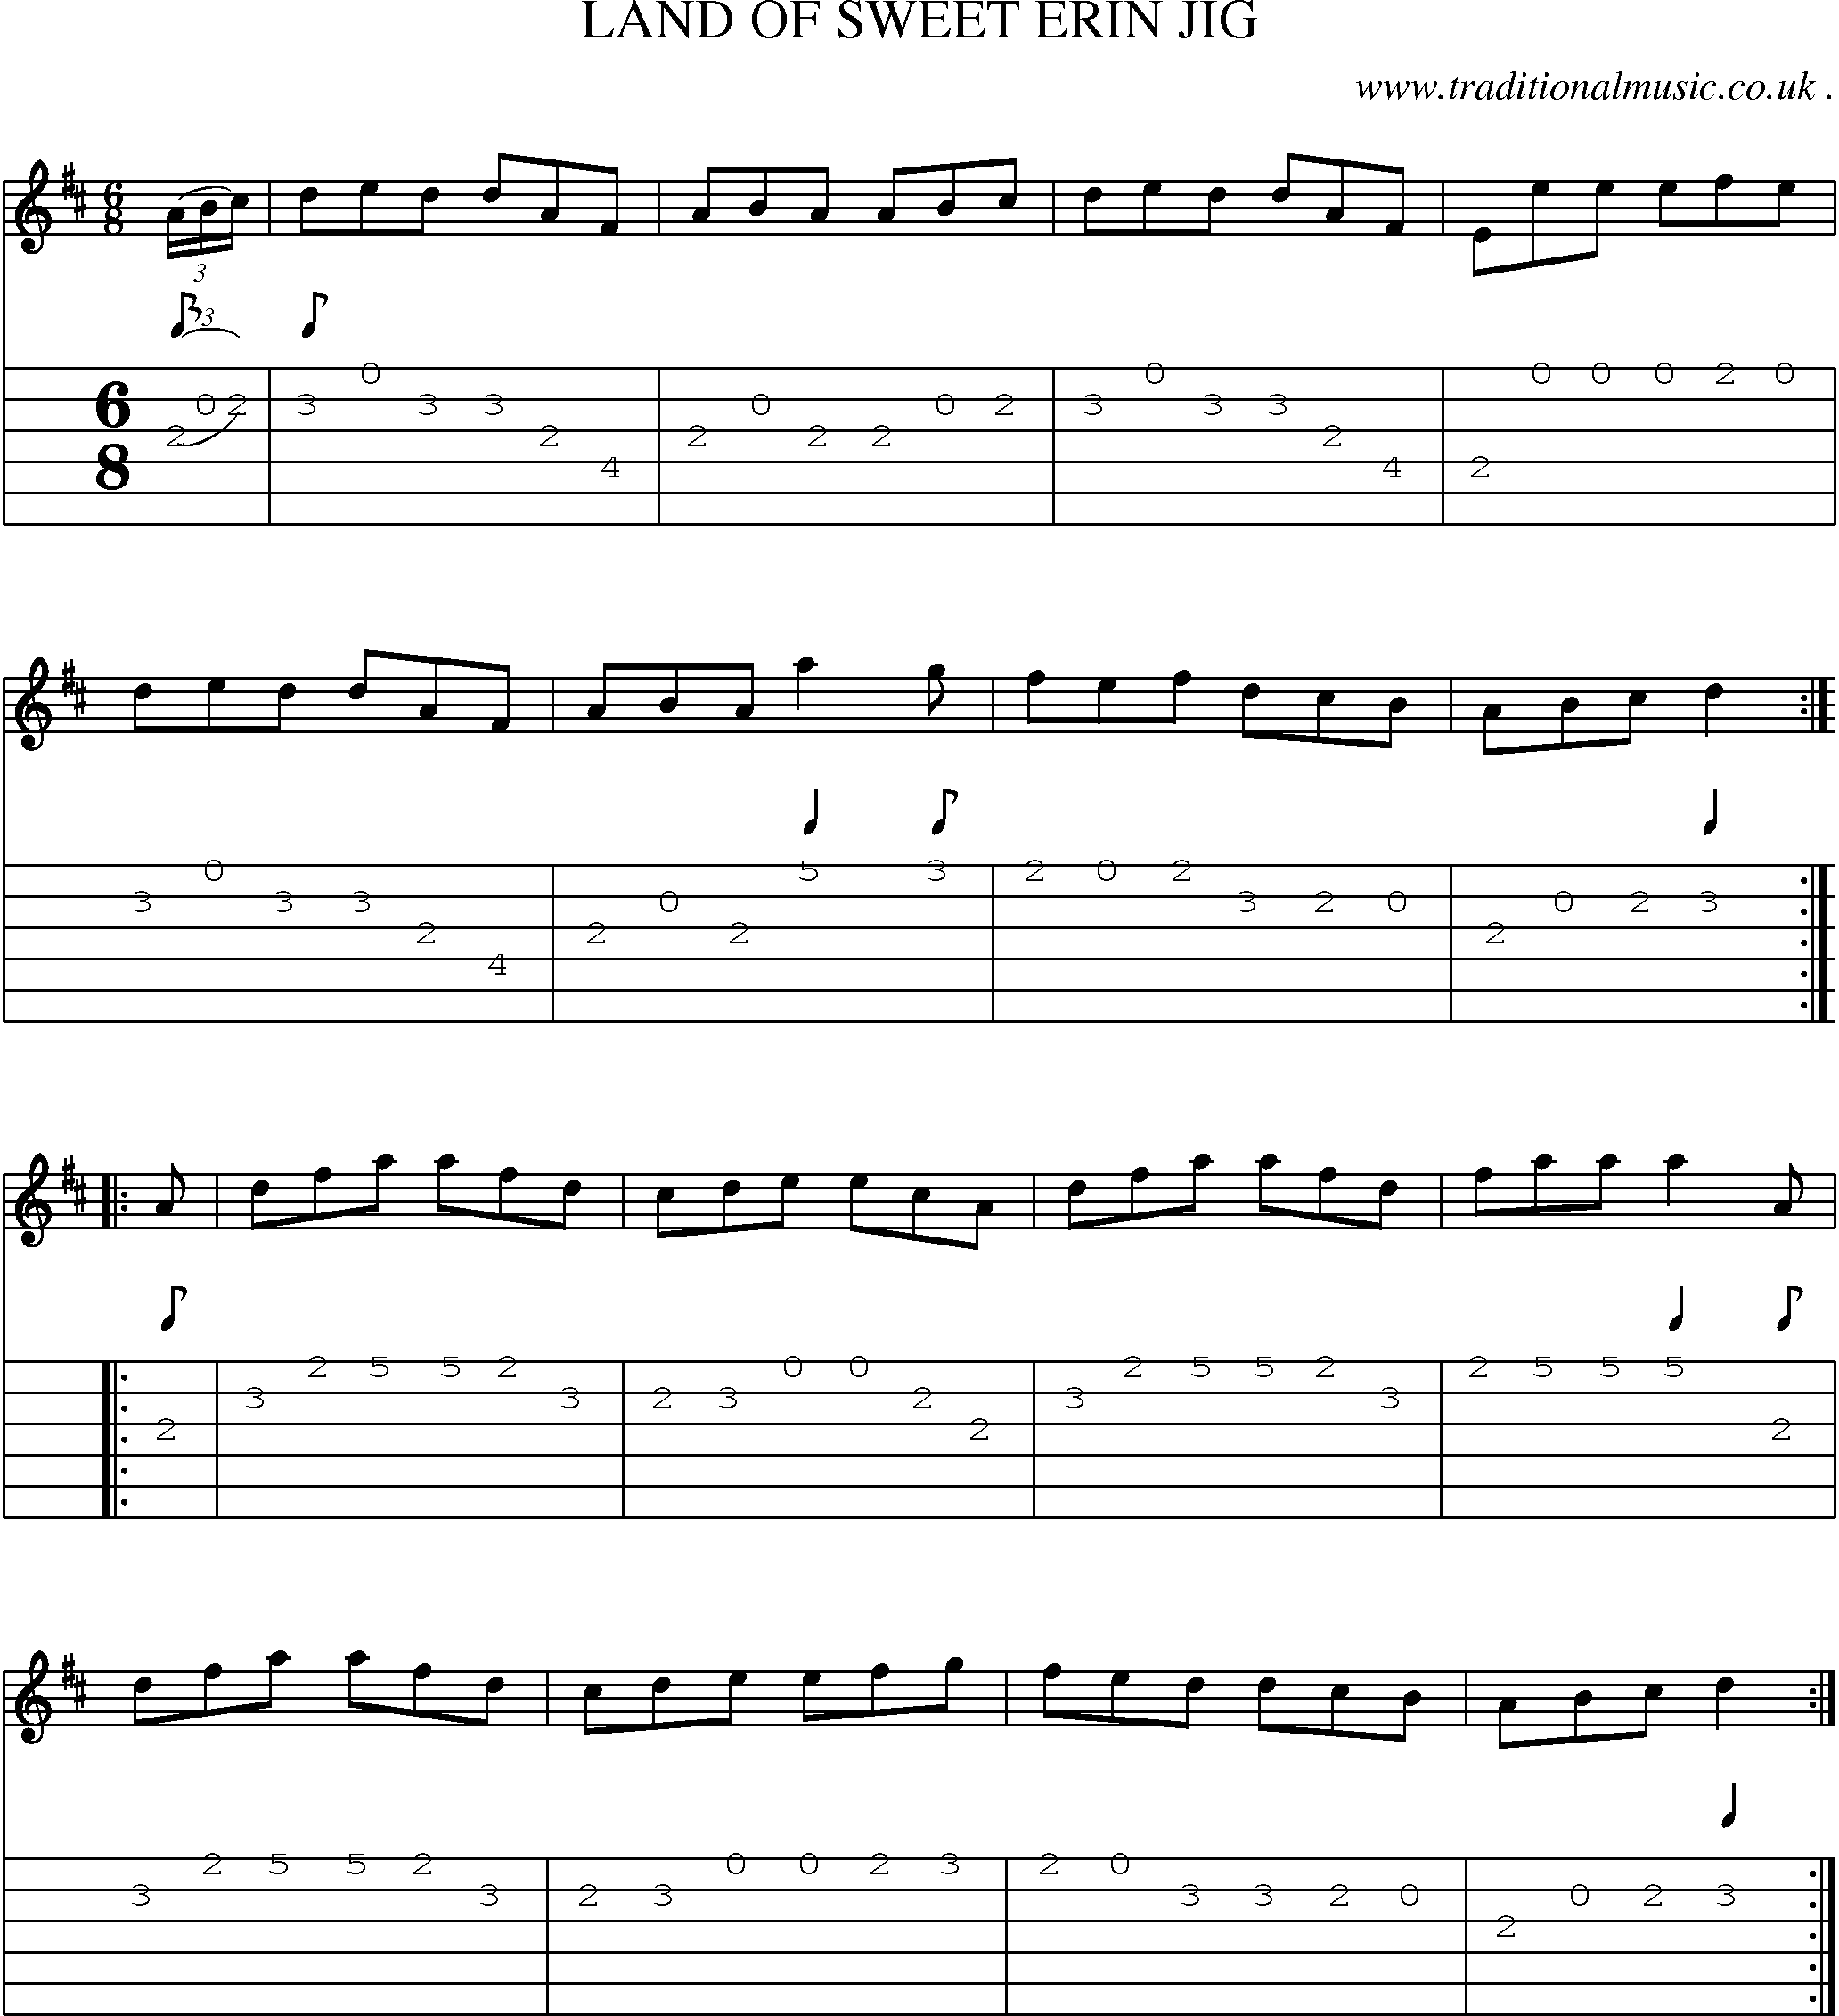 Sheet-Music and Guitar Tabs for Land Of Sweet Erin Jig